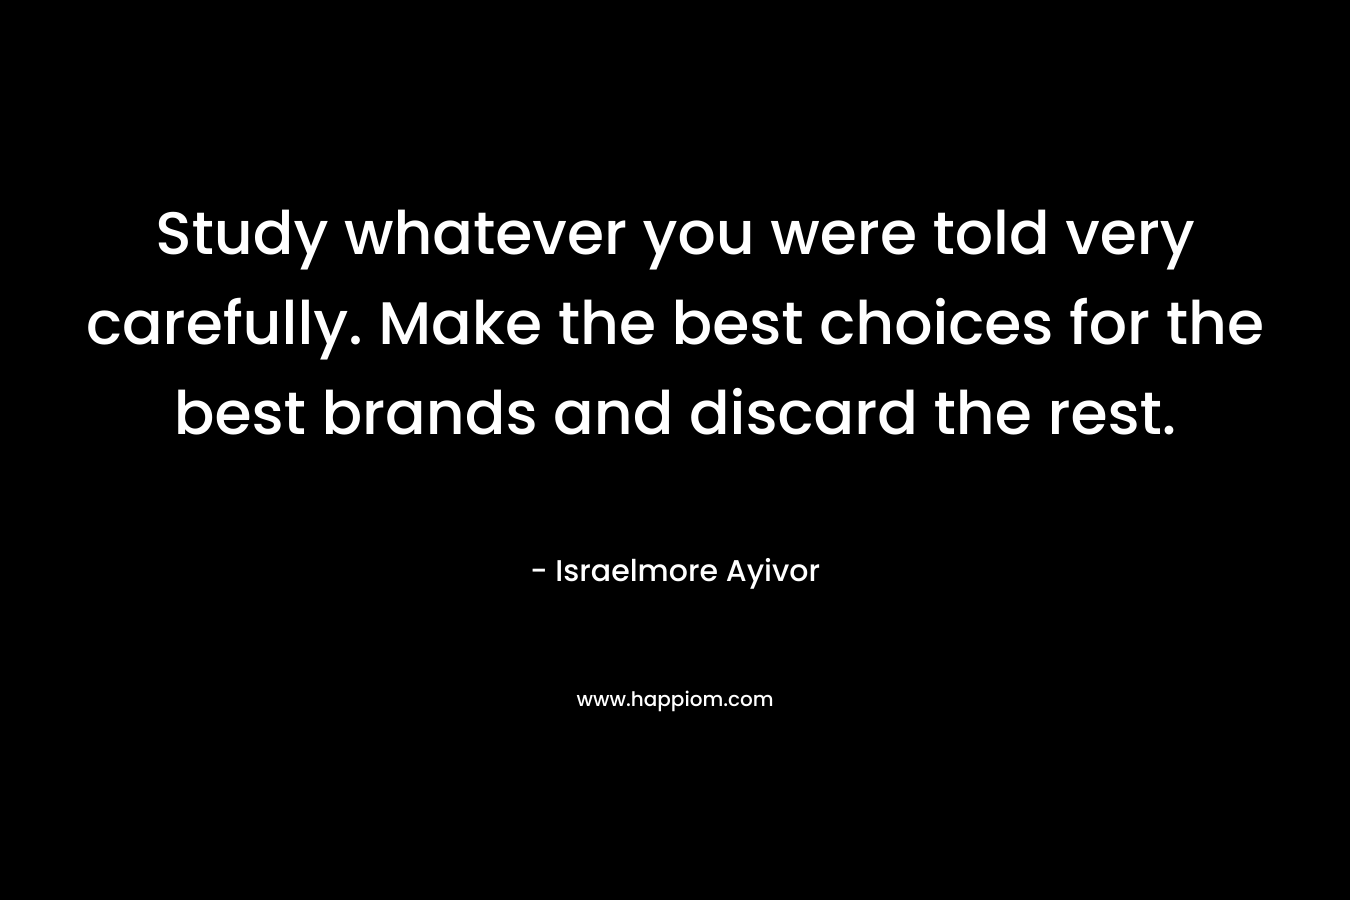 Study whatever you were told very carefully. Make the best choices for the best brands and discard the rest.